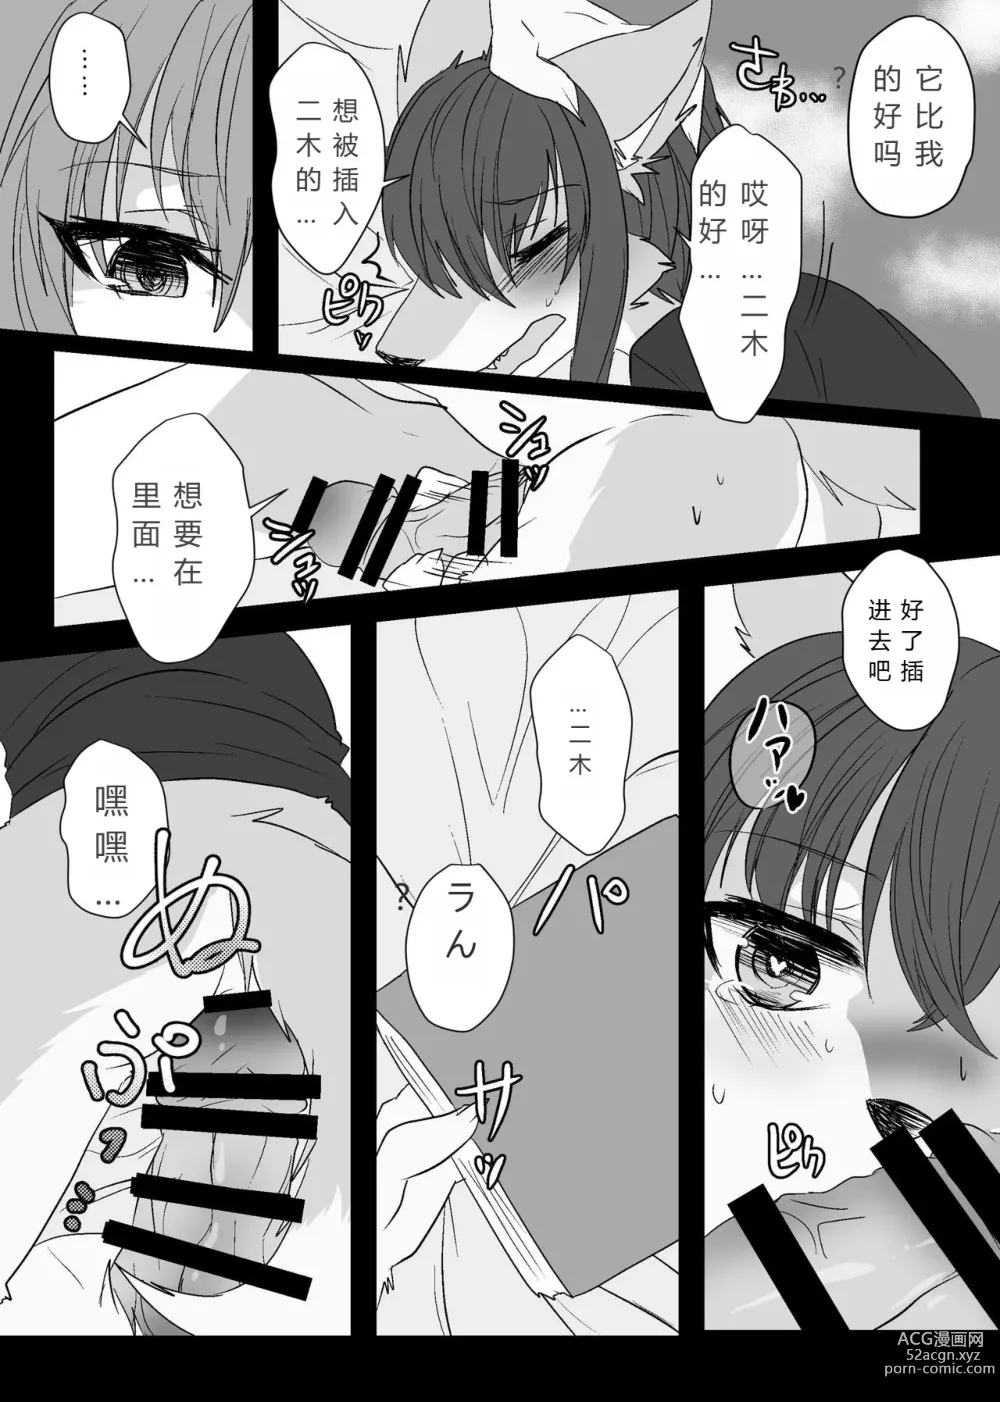 Page 43 of doujinshi 我们要上班吗？